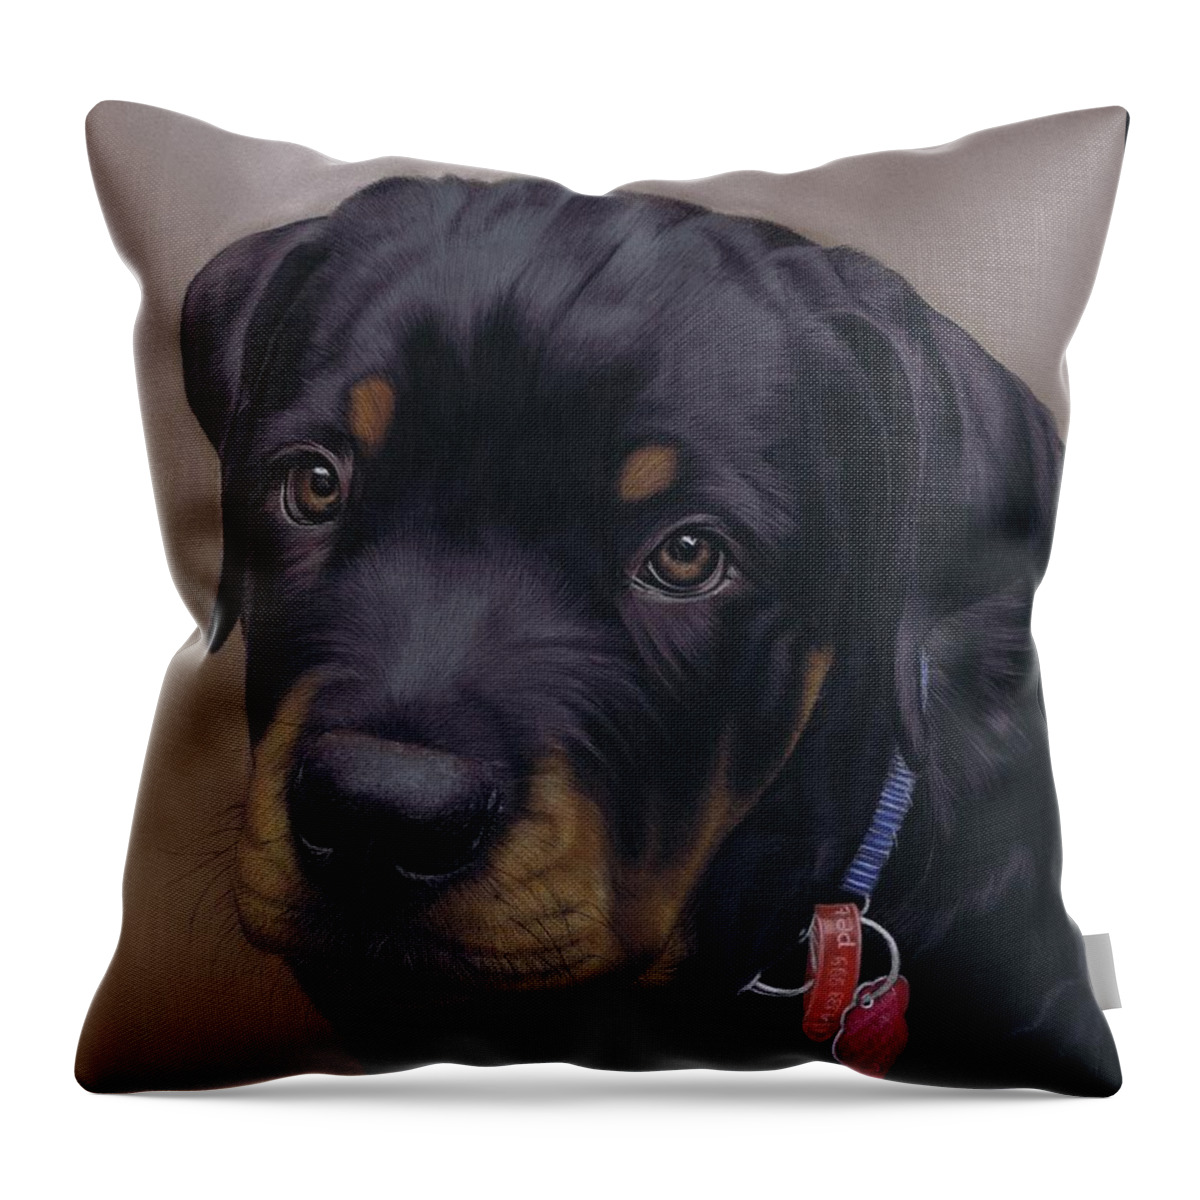 Dog Throw Pillow featuring the pastel Rottweiler Dog by Karie-Ann Cooper